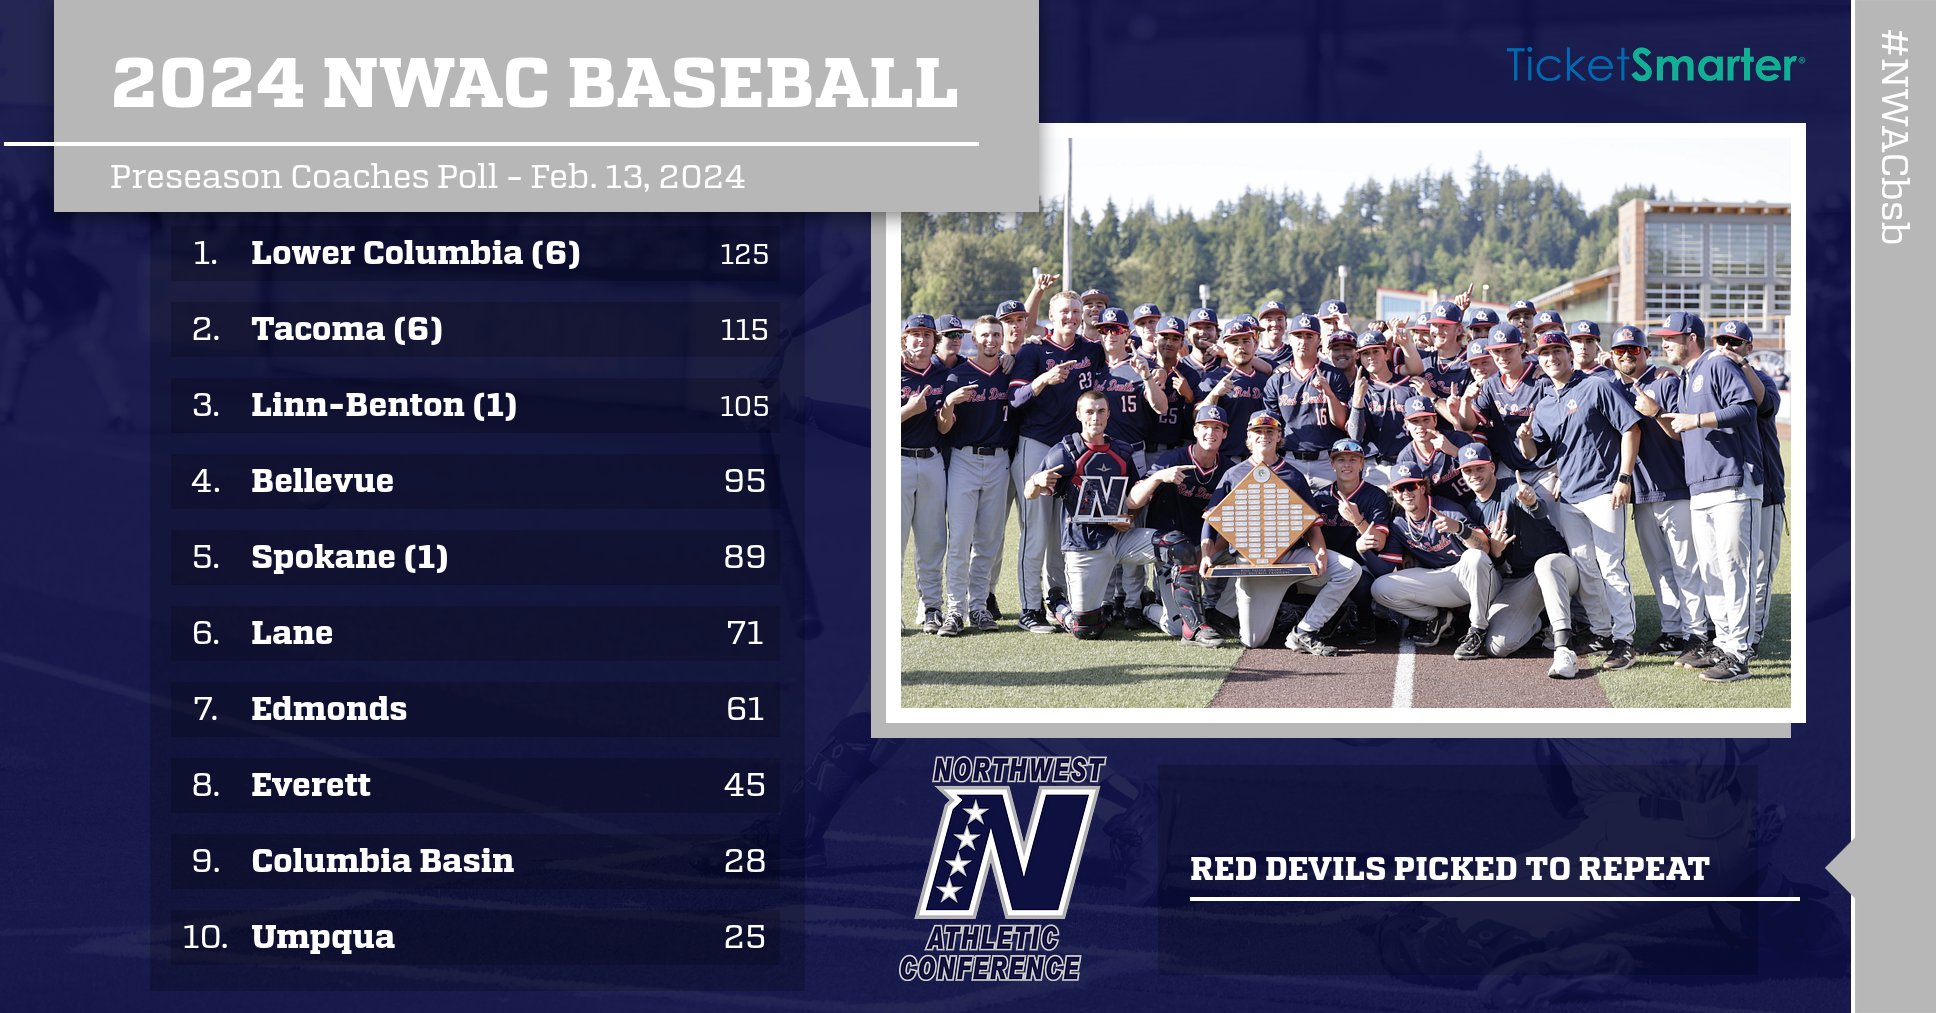 2024 NWAC Baseball Preseason Coaches' Poll - Red Devils Picked to Repeat